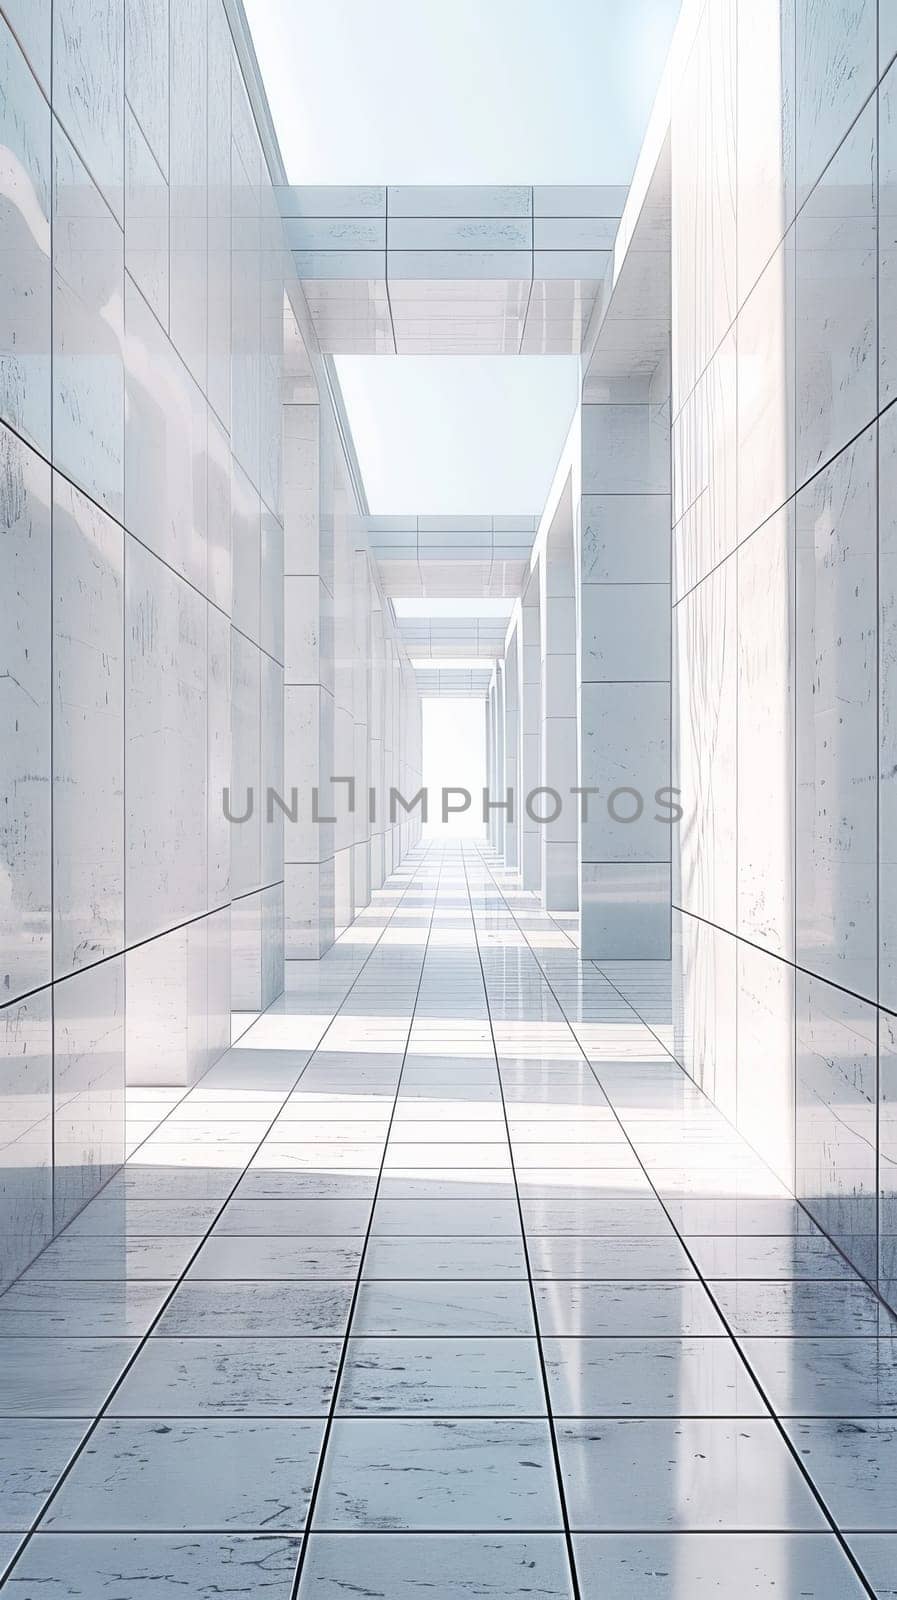 A large empty room with white walls and a white floor. The room is very clean and has a very modern look